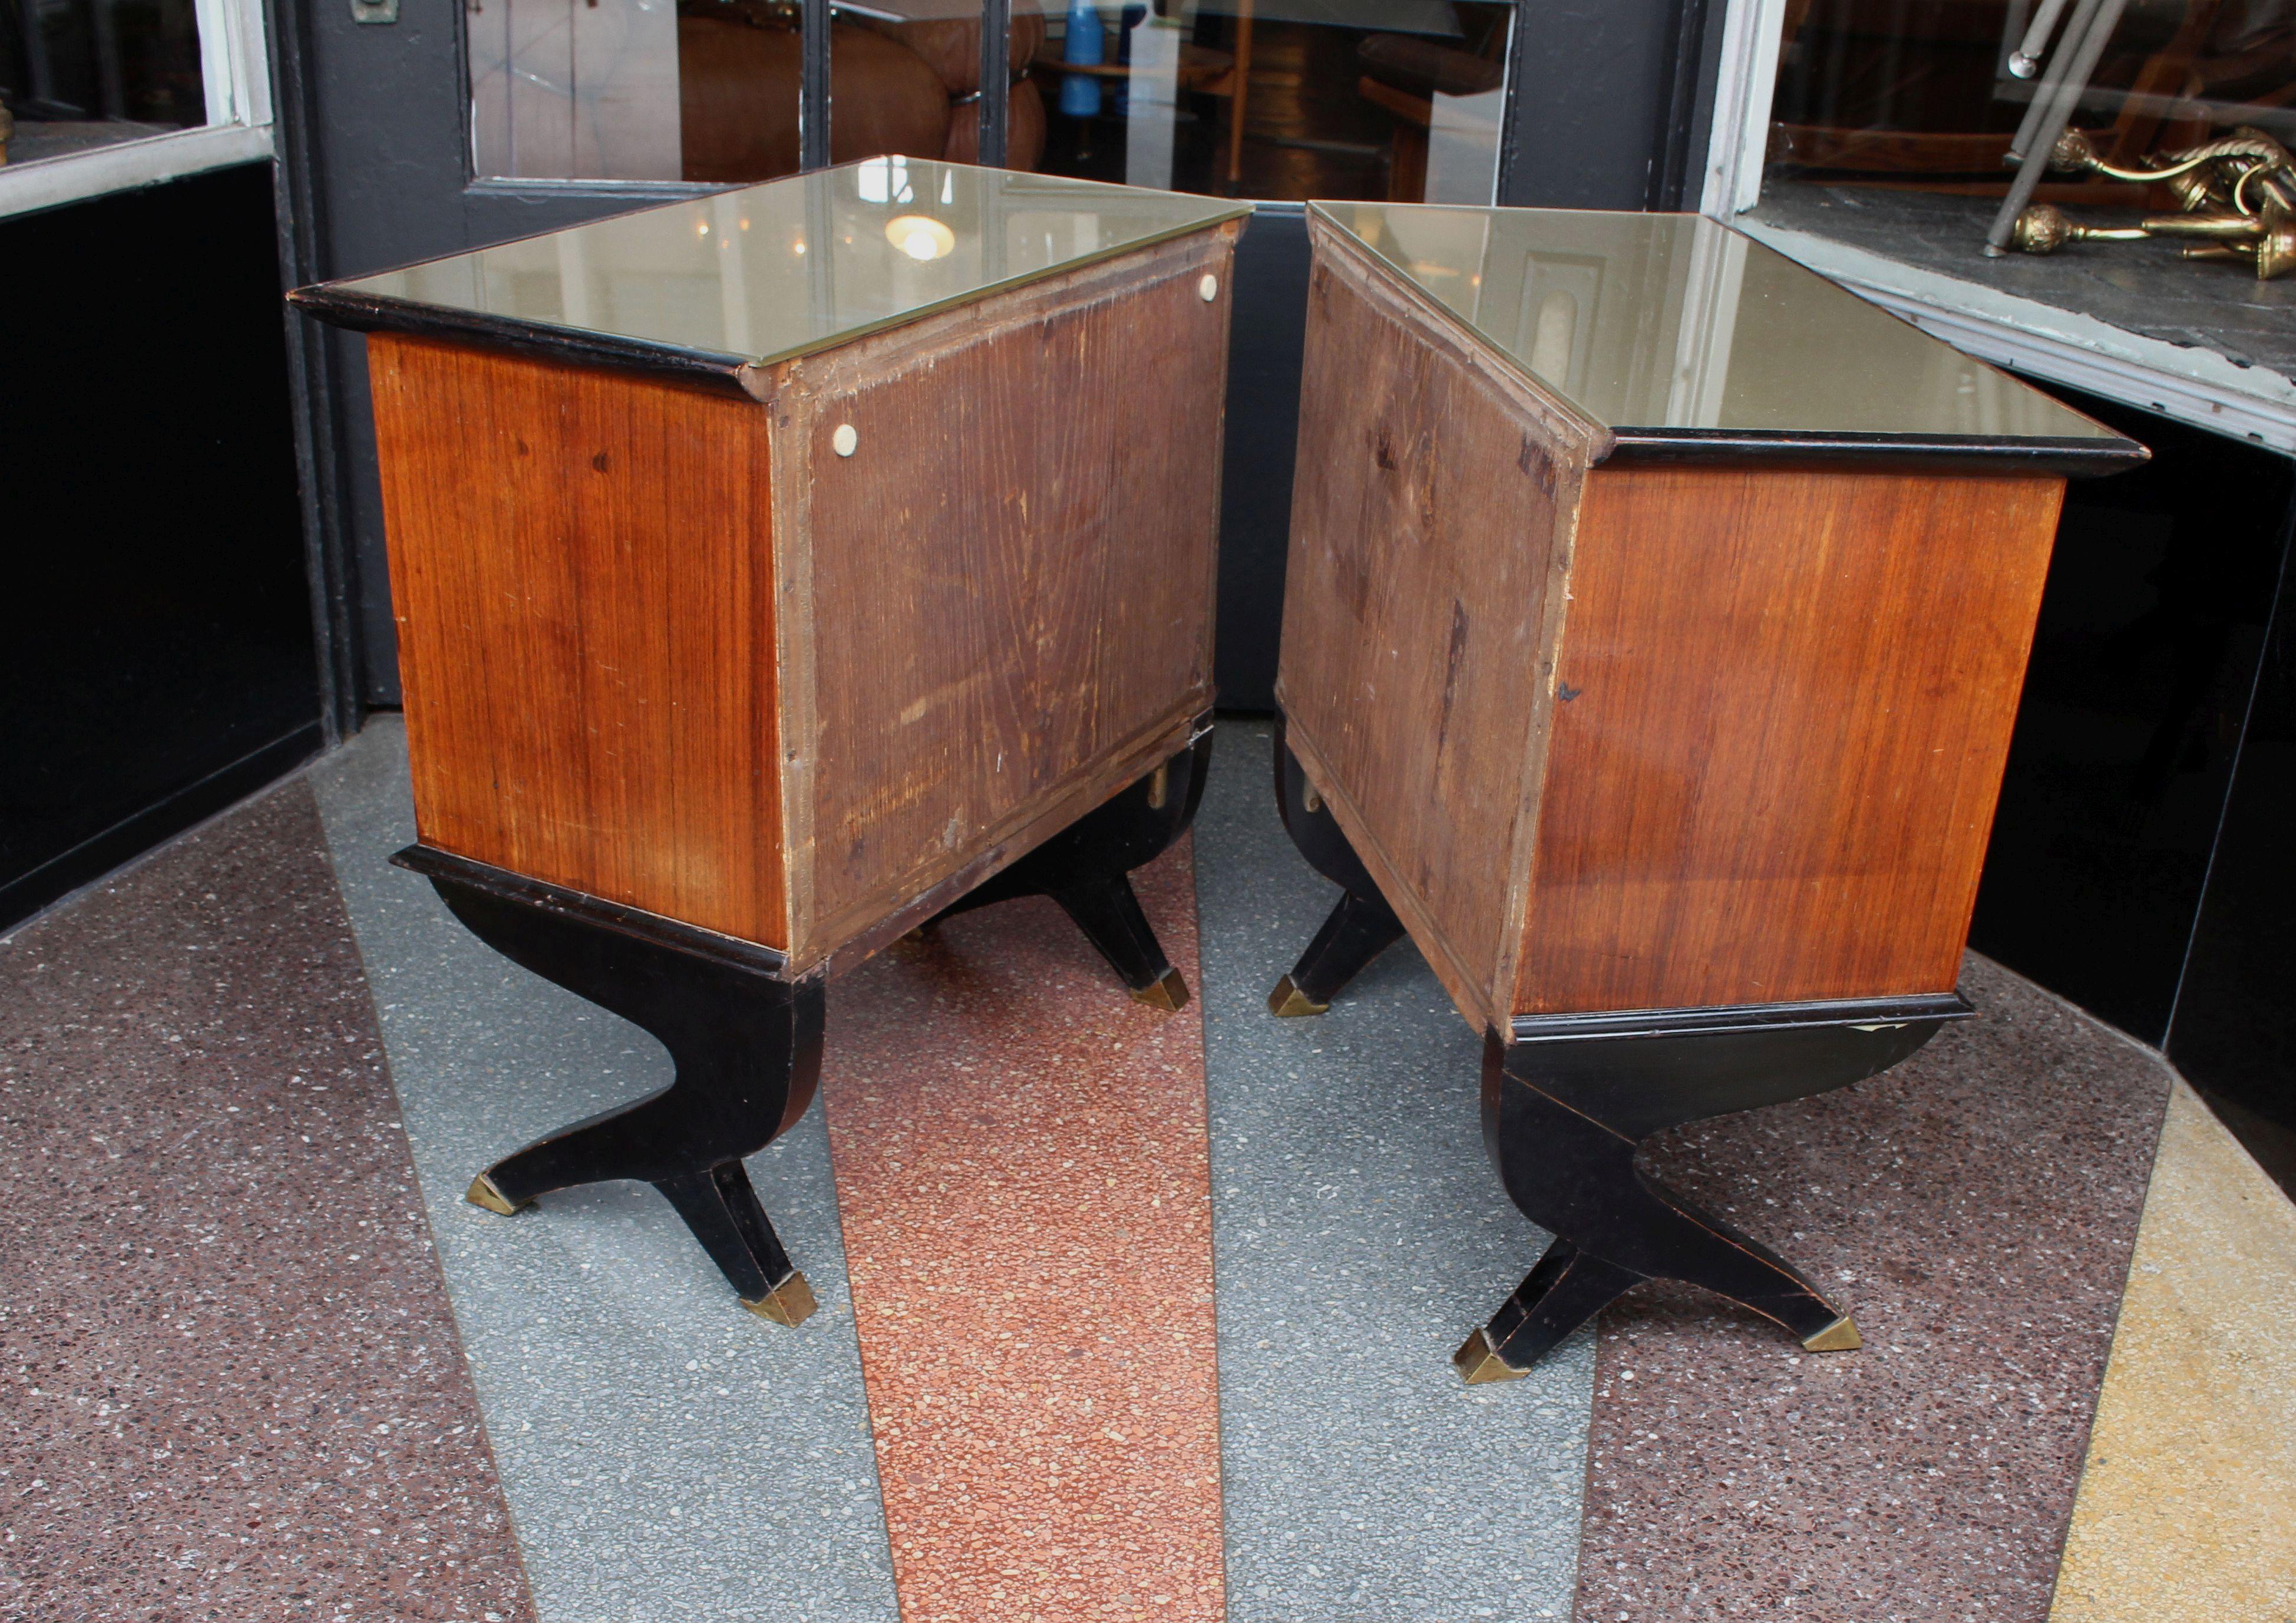 Italian pair of side tables, rosewood and the top is glass mirror. Bottom of the legs are the brass boots.
Side tables are in original condition as shown on the photos.
